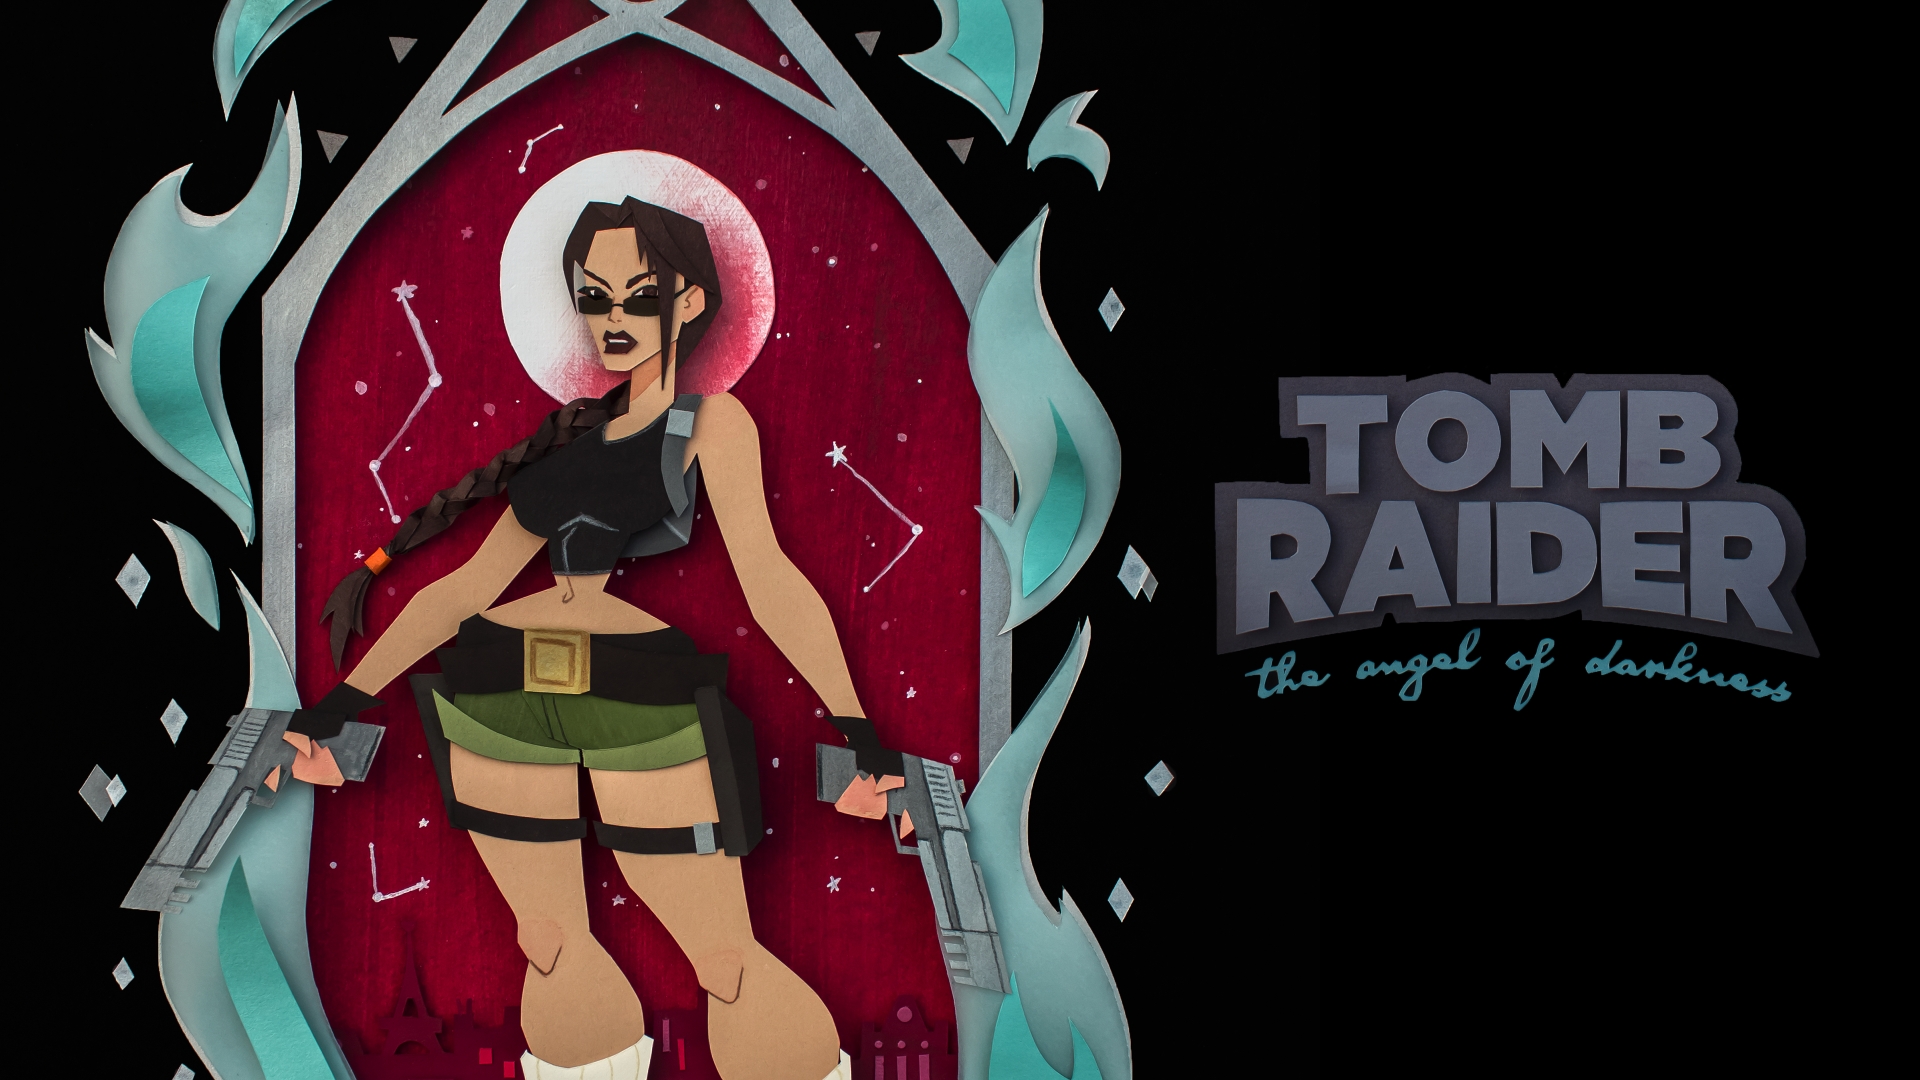 Reimagined Tomb Raider: The Angel of Darkness box art by Caleb Groves